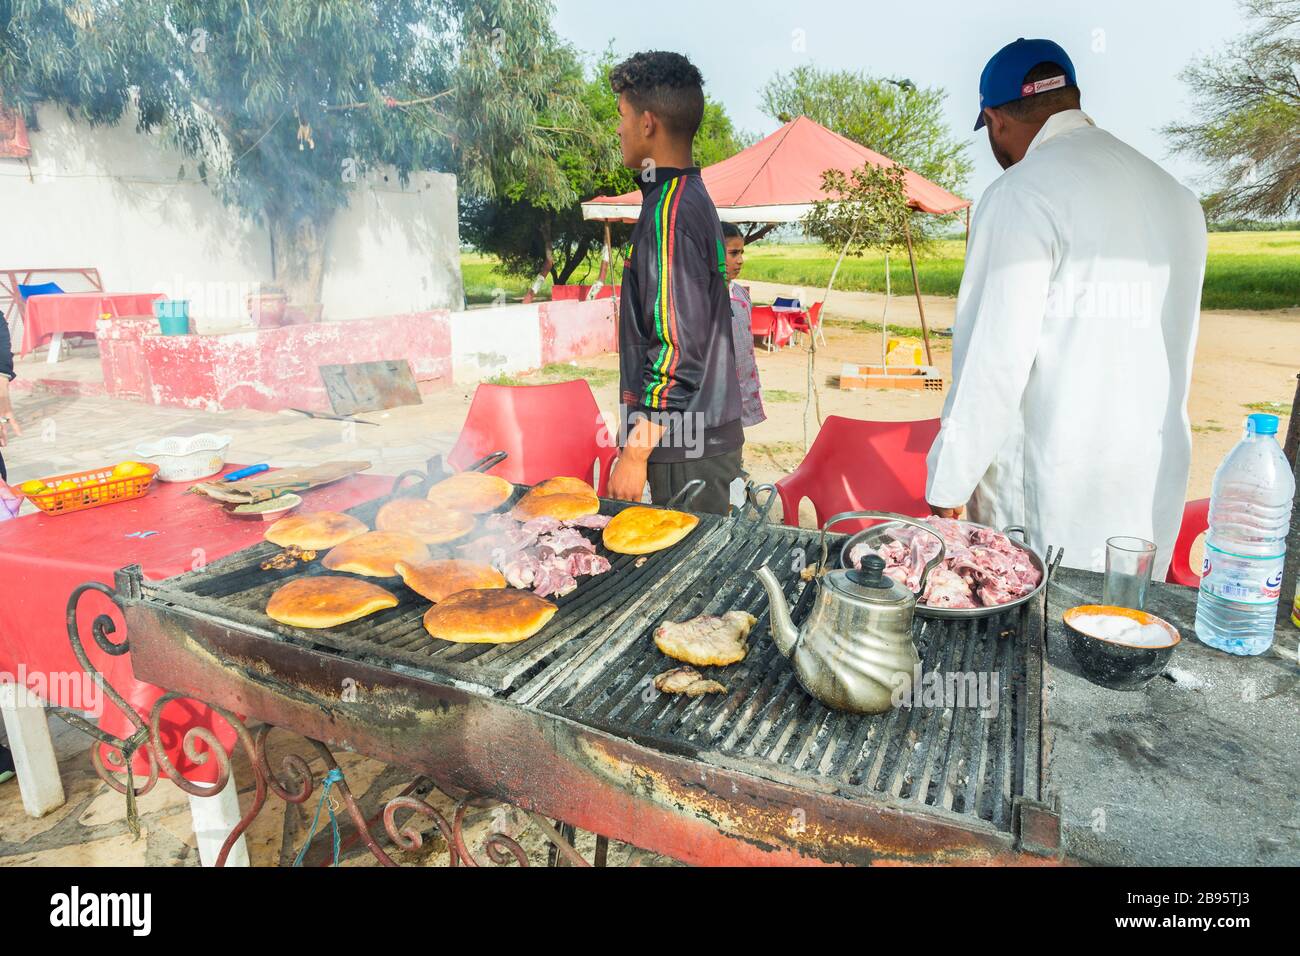 Cooking lamb in a road food stall. Stock Photo